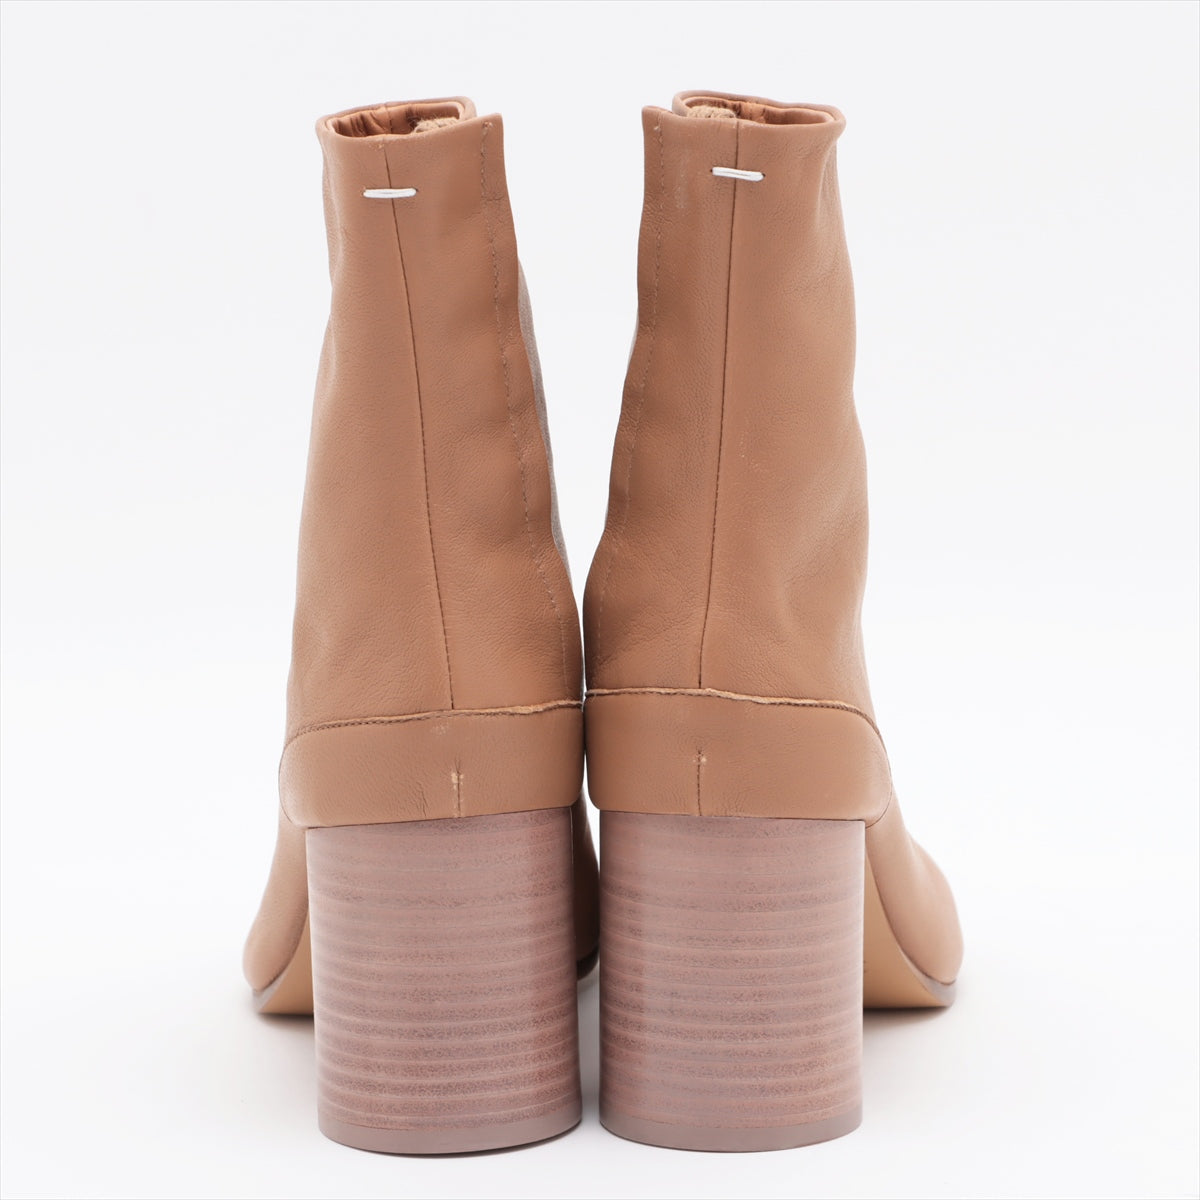 Maison Margiela TABI Leather Short Boots 35 Ladies' Brown 22 box There is a bag